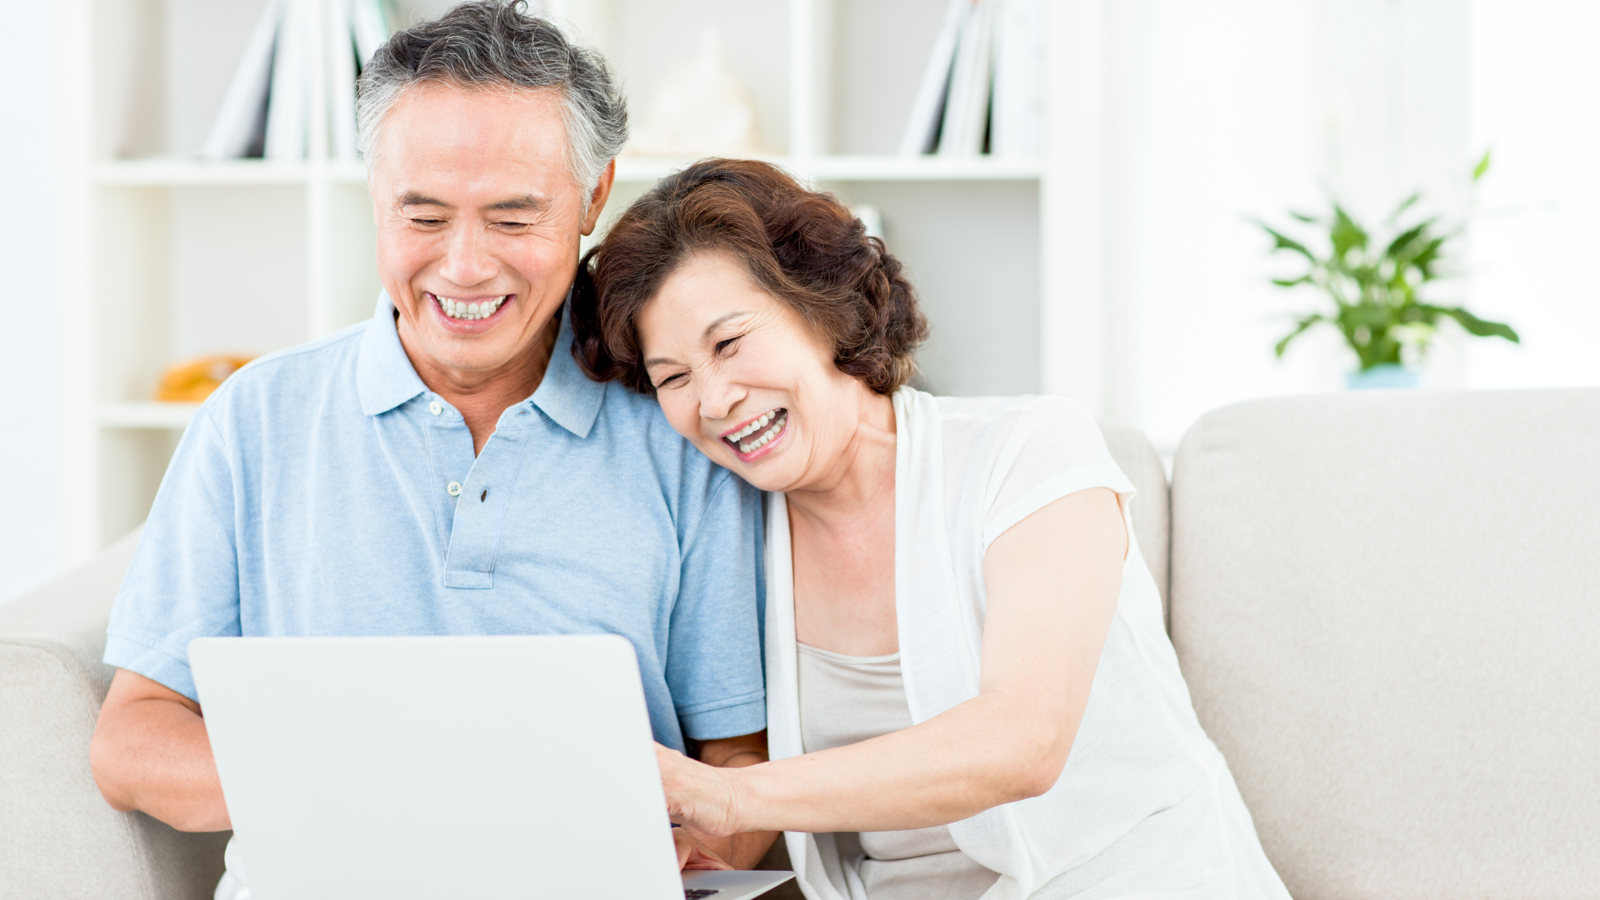 Couple smiling and looking at a laptop